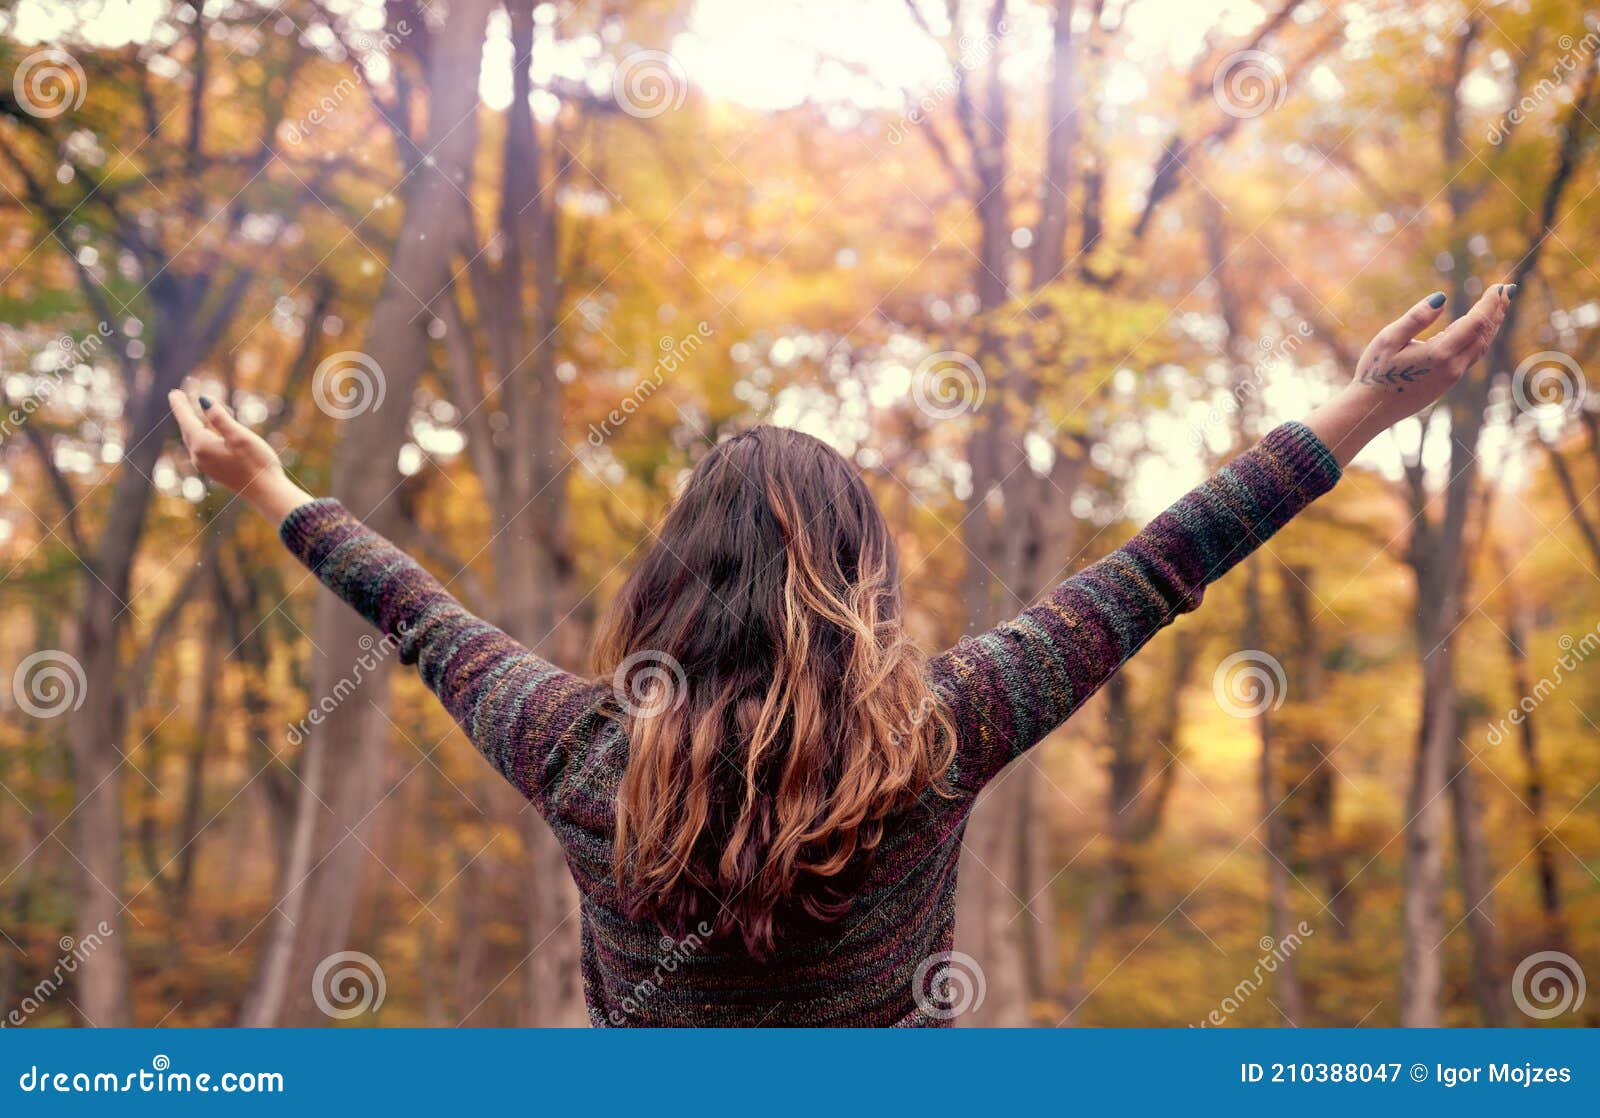 young woman connecting with nature with open arms showing gratitude for life, mindfulness concept